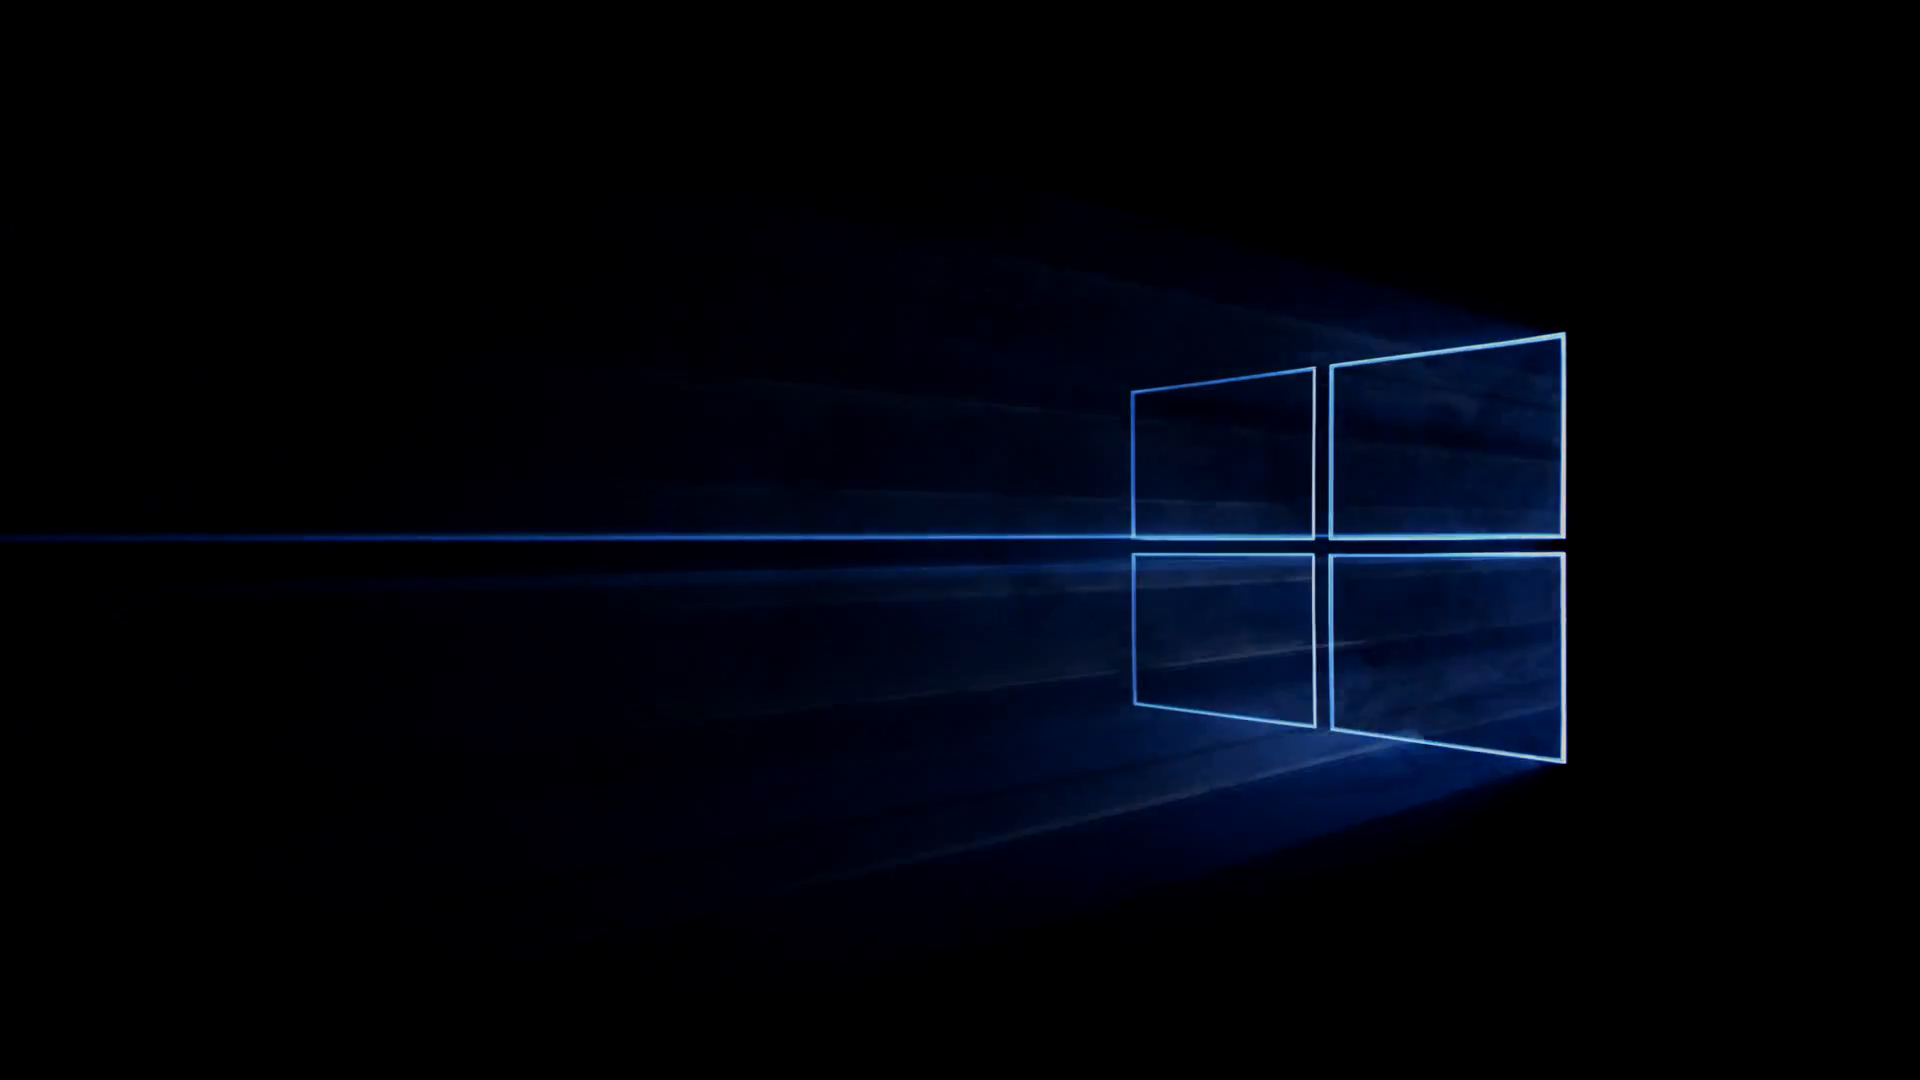 Windows 10 Wallpapers 08 - [1920 x 1080] Full Hd Wallpapers For Windows 8 1920x1080